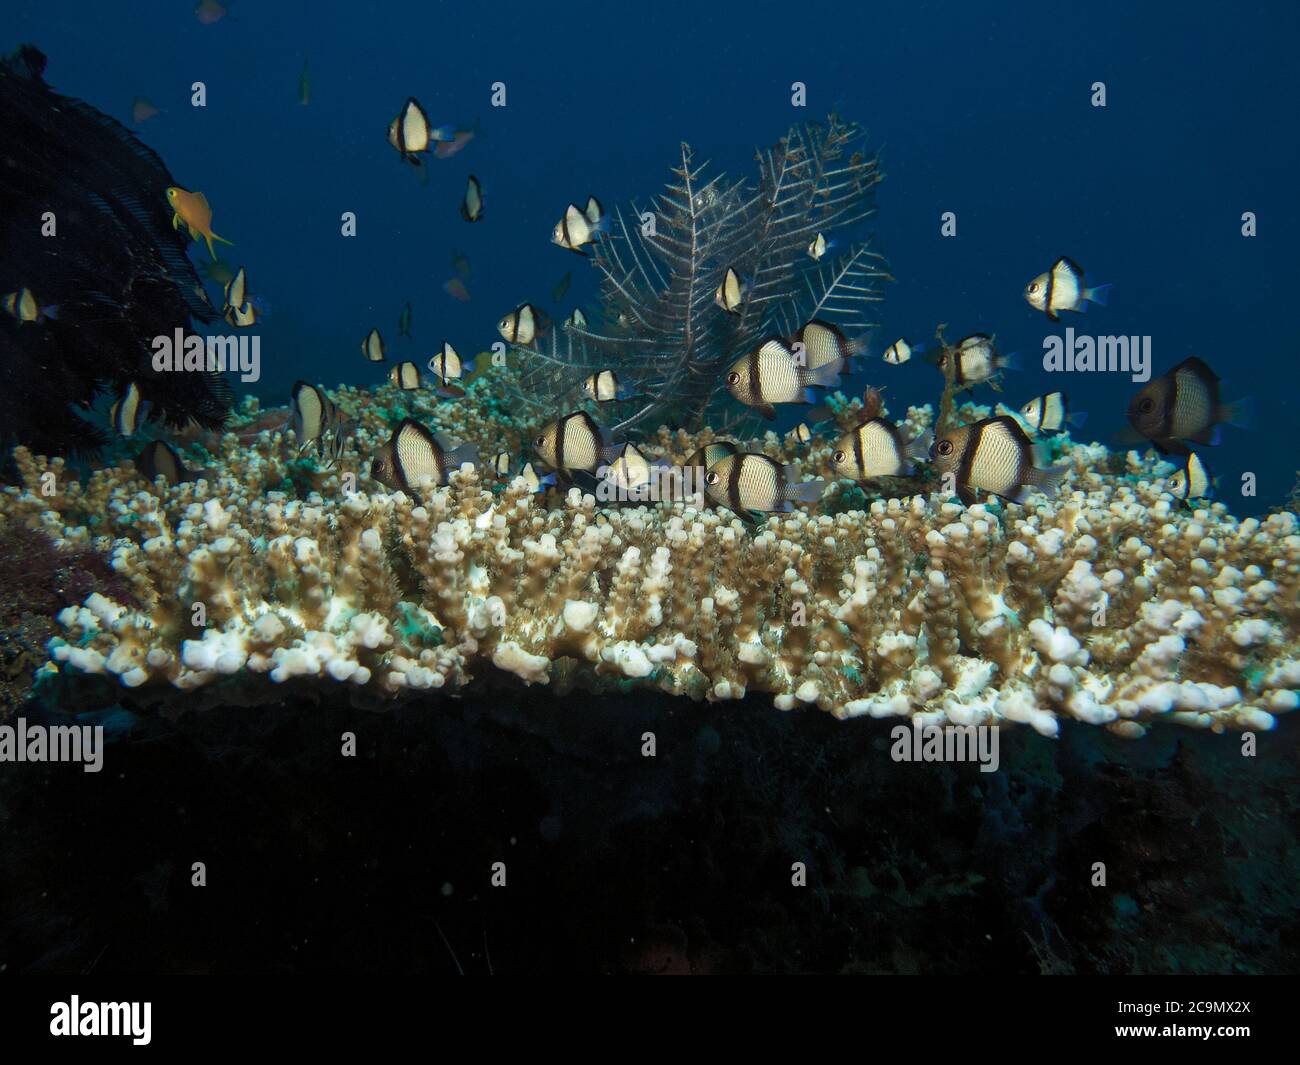 Shoal of Two Stripe Damselfish, Dascyllus reticulatus, over hard corals where they are protection from predators, Bali, Indonesia Stock Photo